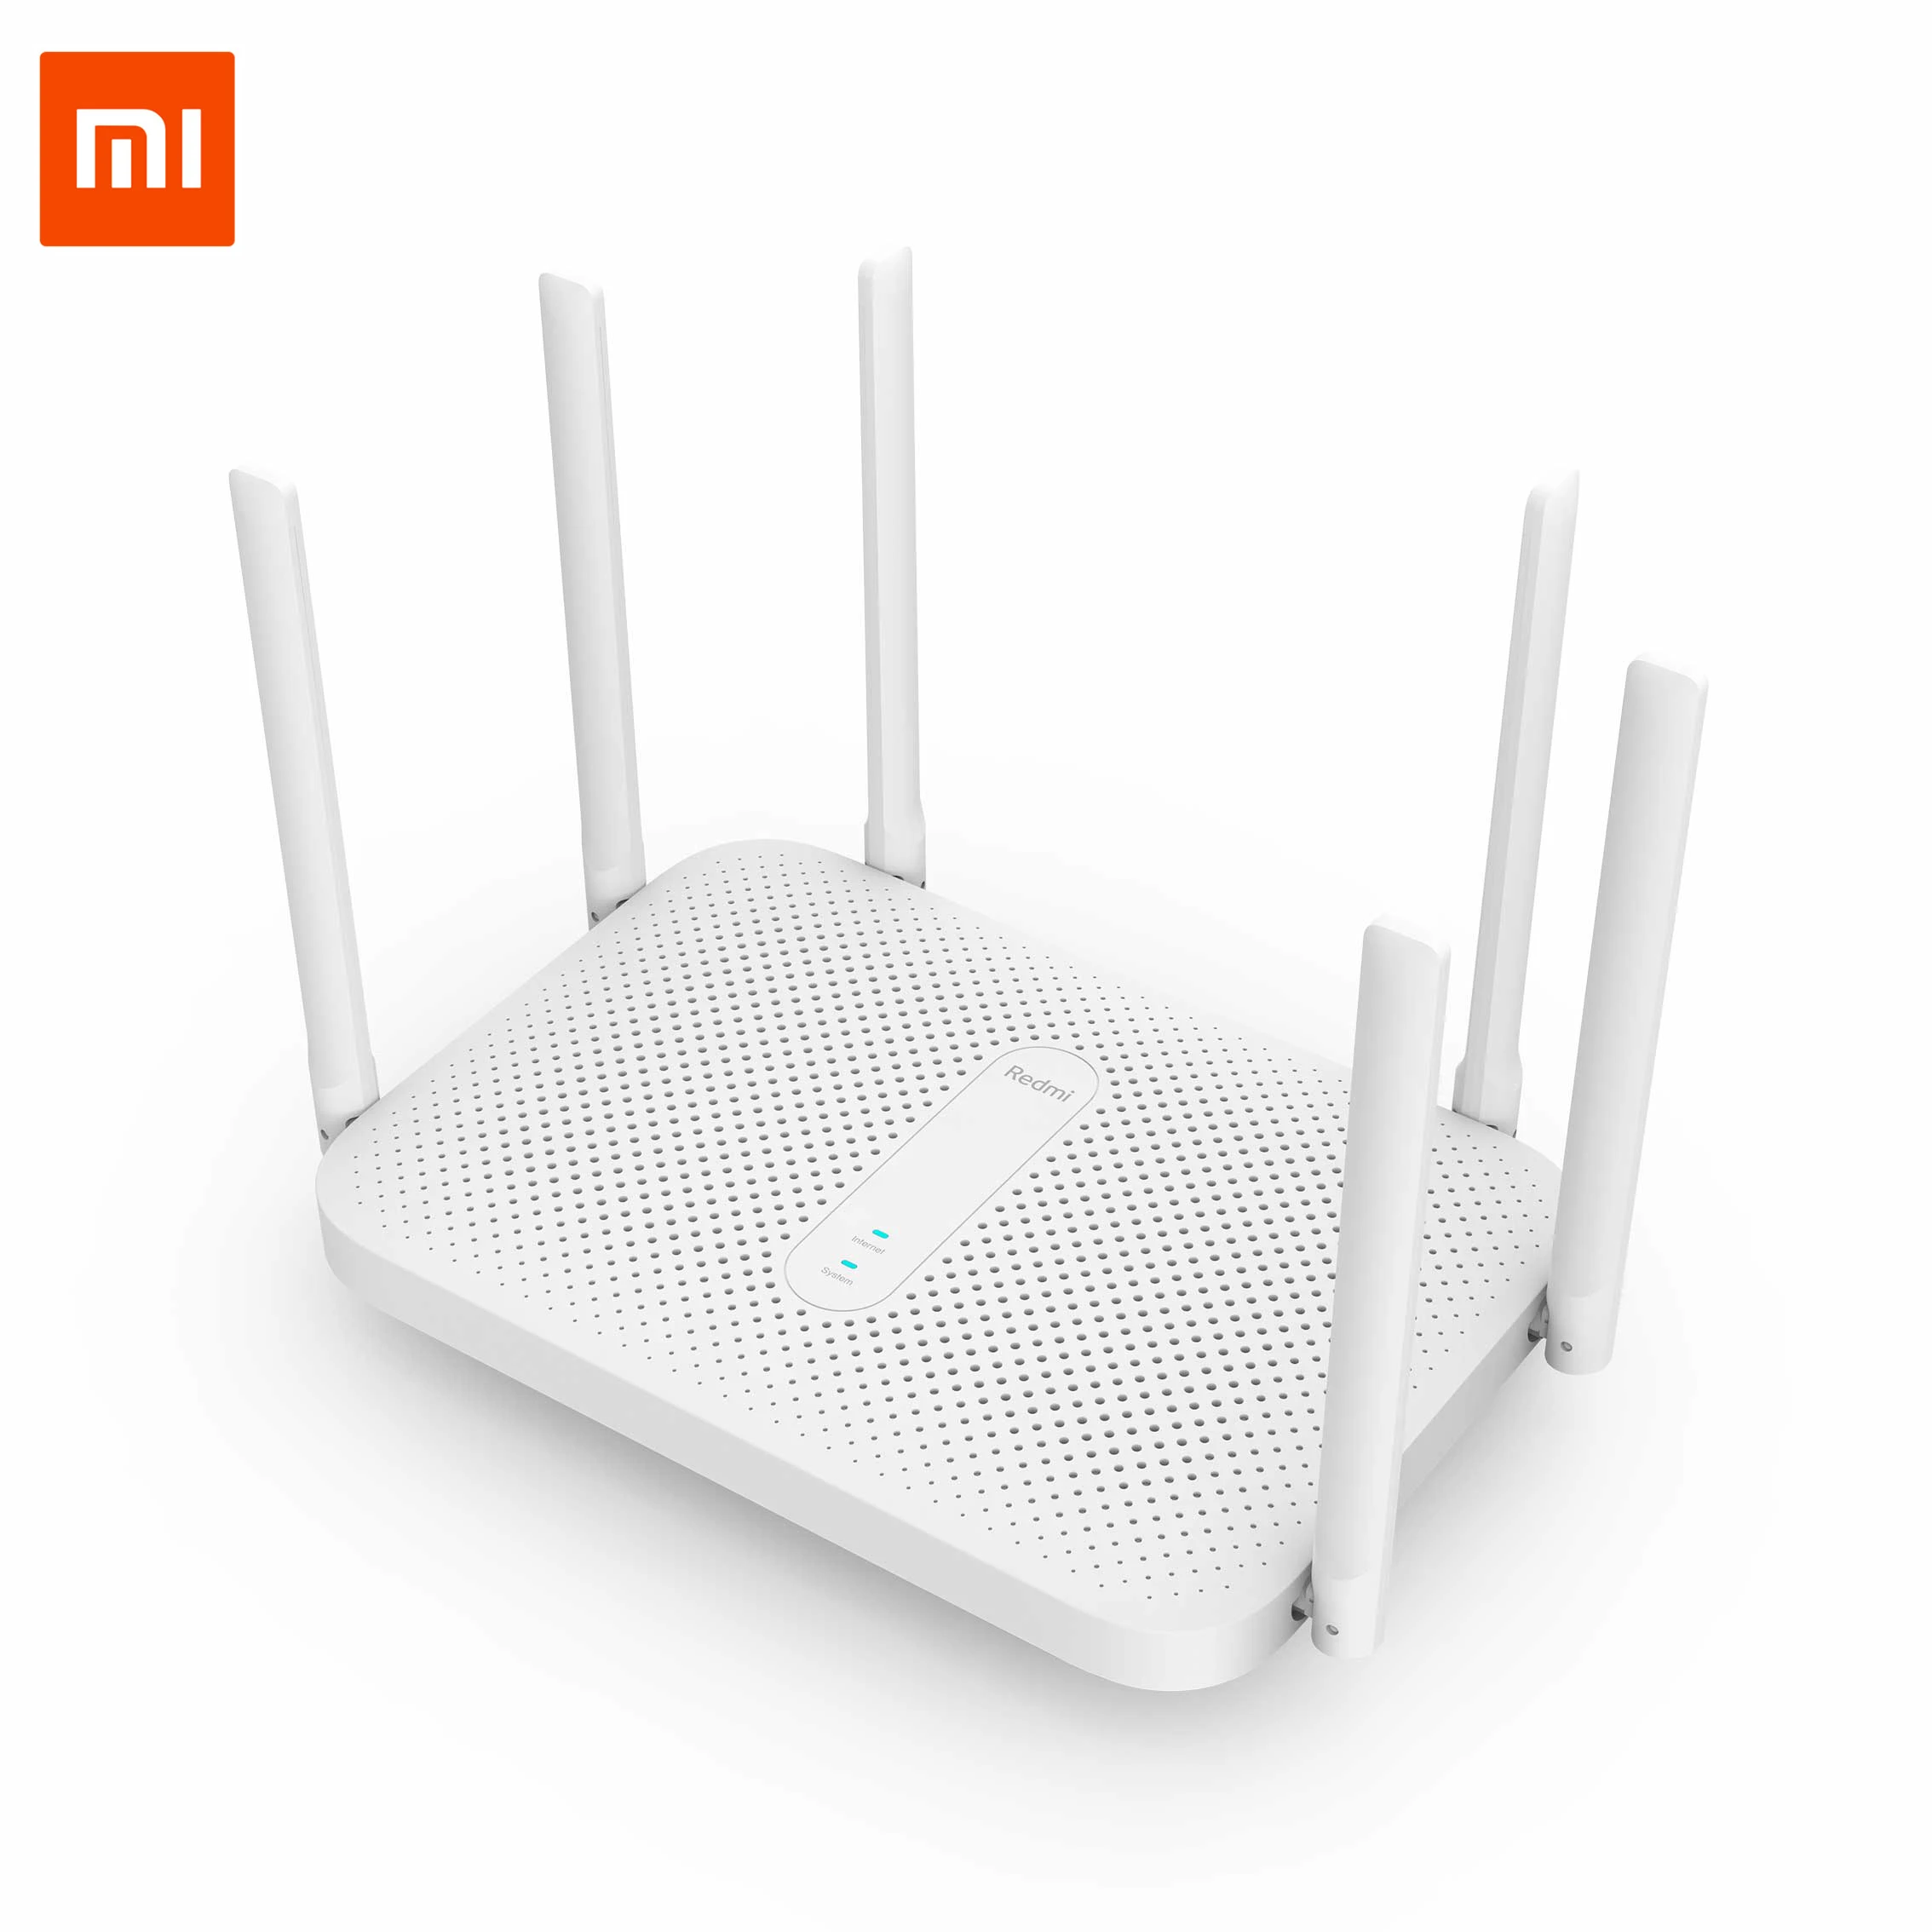 New Xiaomi Redmi AC2100 Router Gigabit Dual-Band Wireless Router Wifi Repeater 6 High Gain Antennas Wider Cover For Xiaomi Home